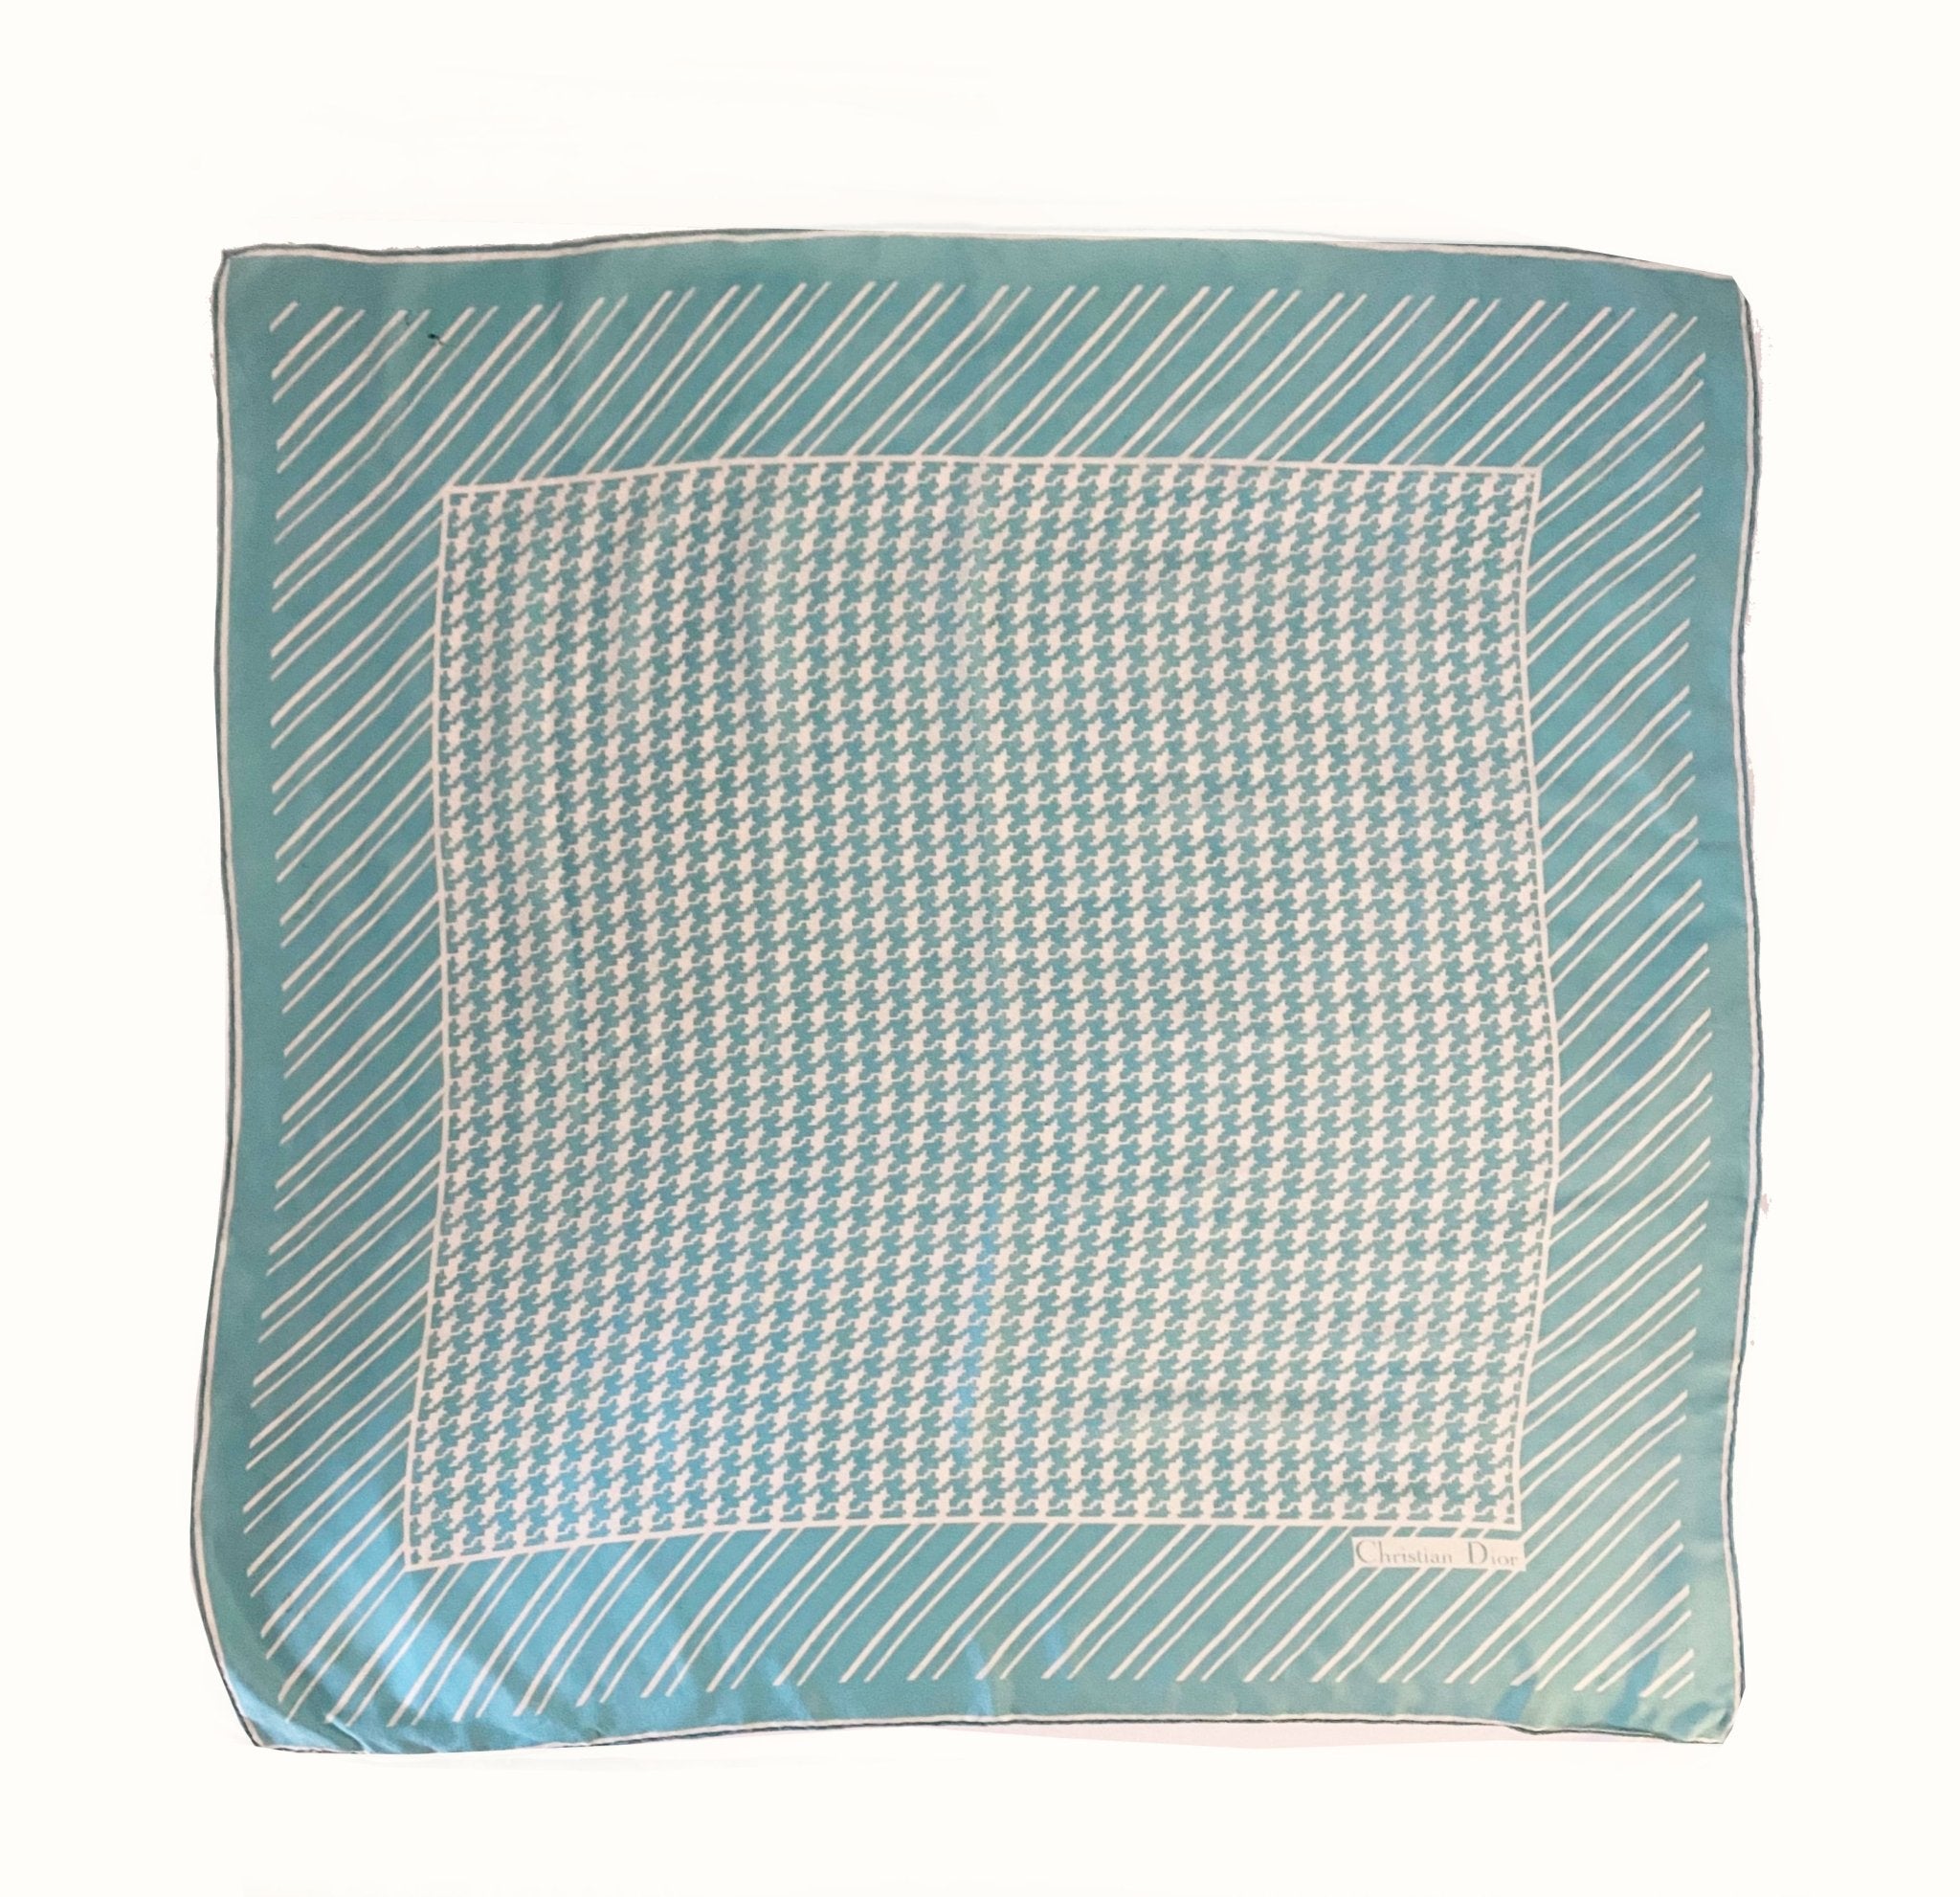 1980s Christian Dior Houndstooth Teal Turquoise Silk Scarf - style - CHNGR